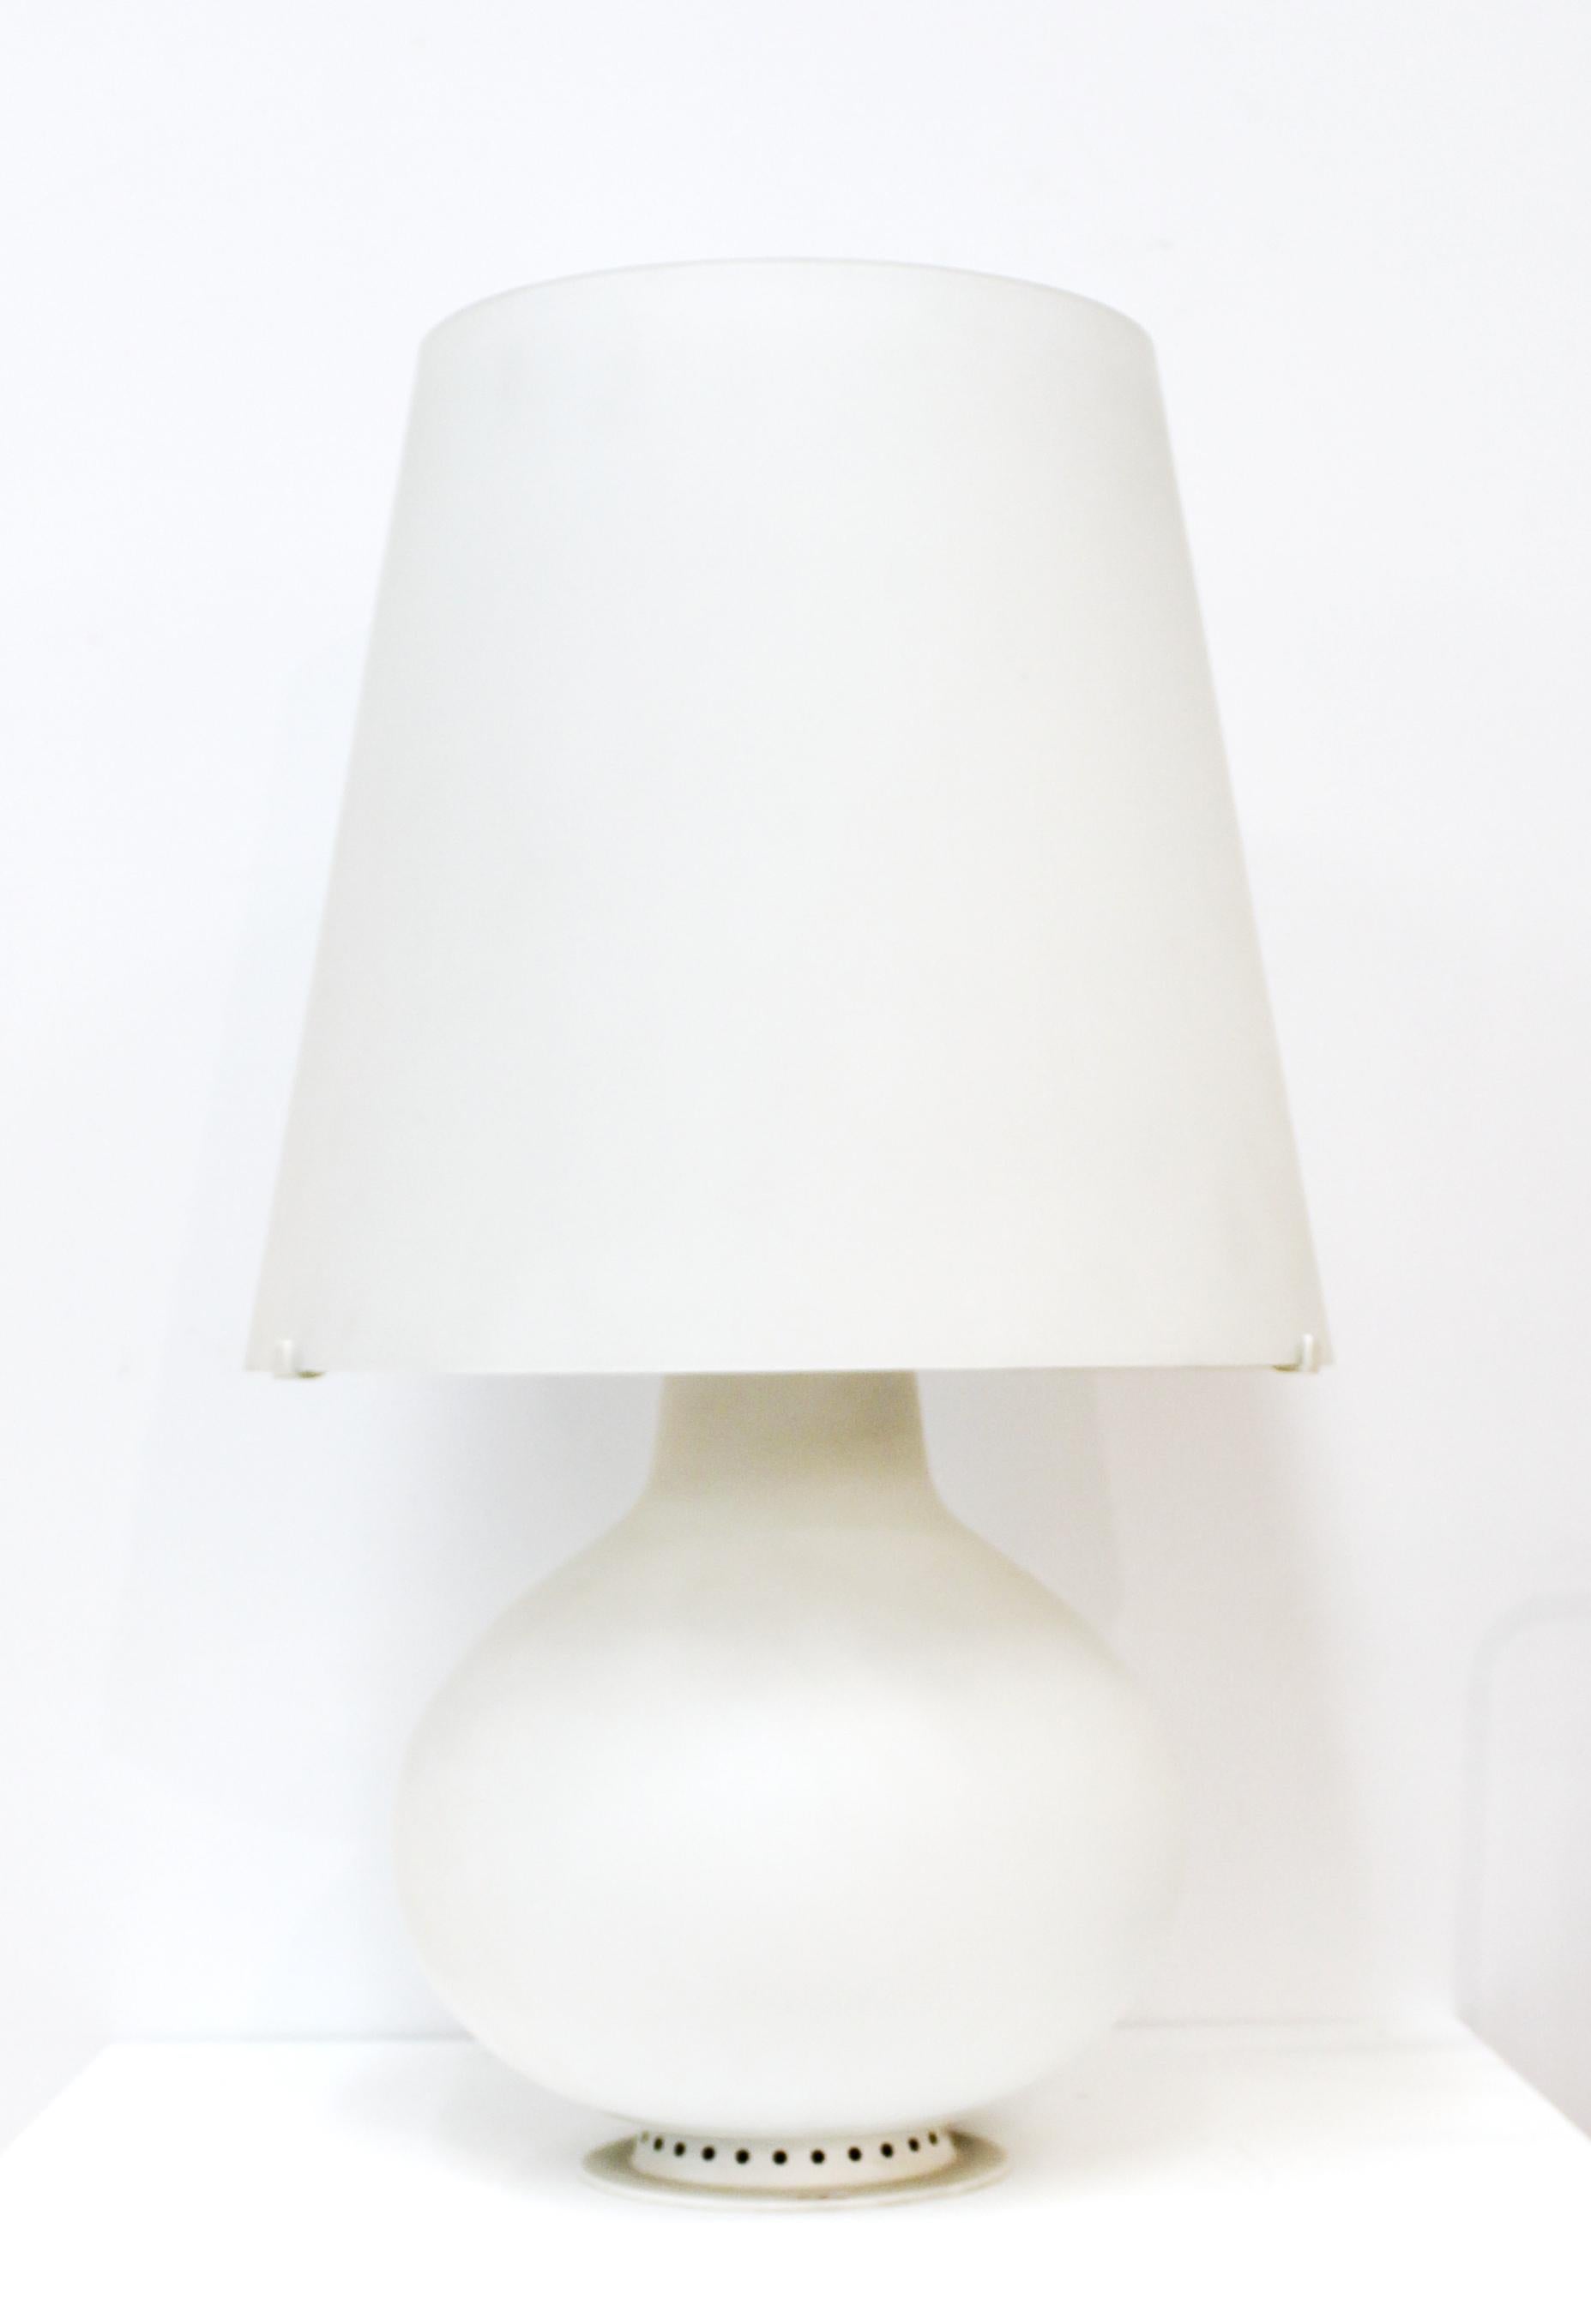 Max Ingrand for Fontana Arte Italian Modern table lamp in white glass with white glass shade. Designed by Max Ingrand in the 1950s, this model is likely from the 1970s-1980s. In great vintage condition with age-appropriate wear.